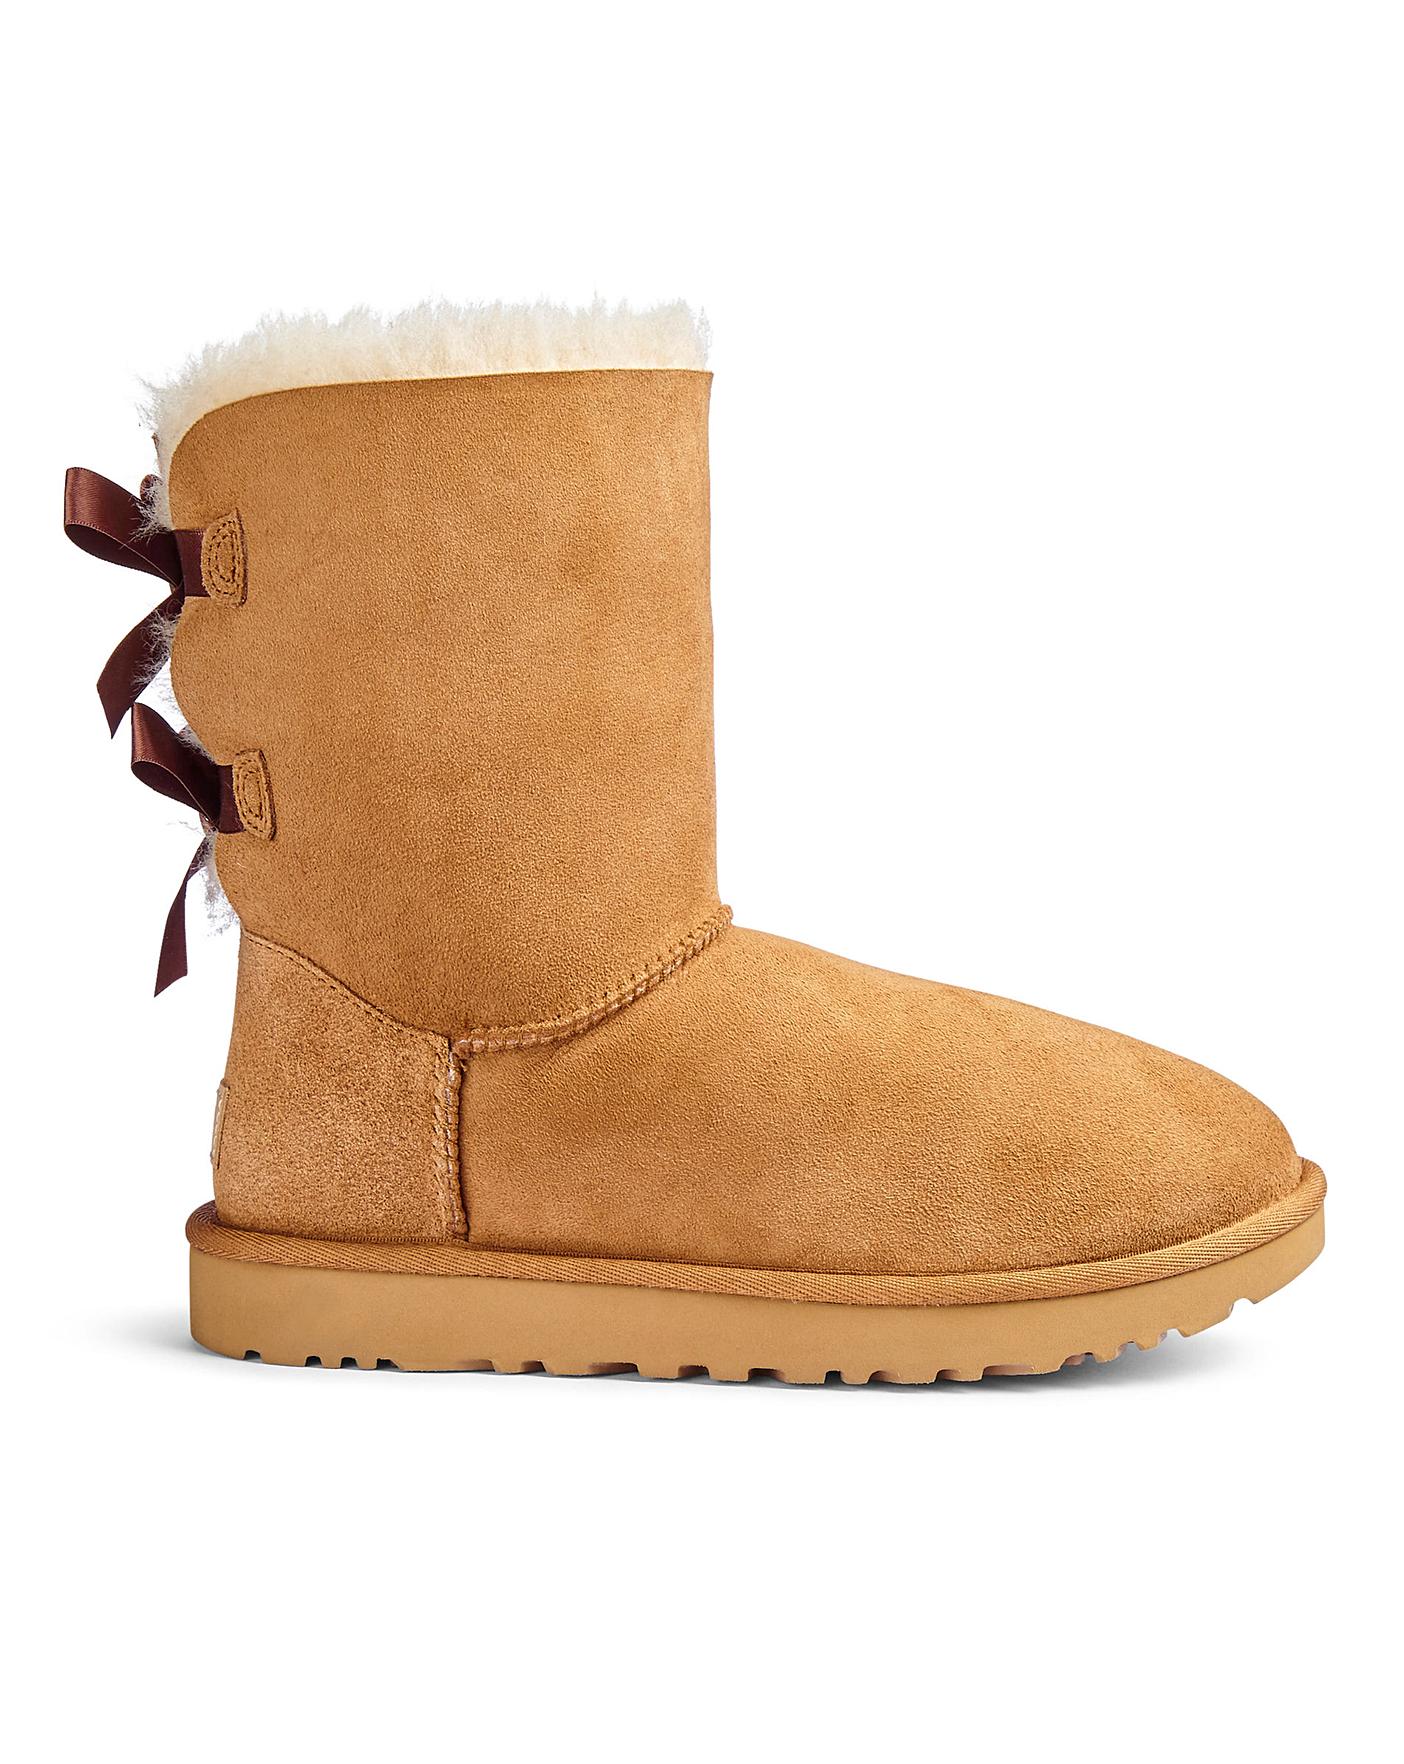 Treat Mom to These Sweet UGG Bailey Bow II Boots